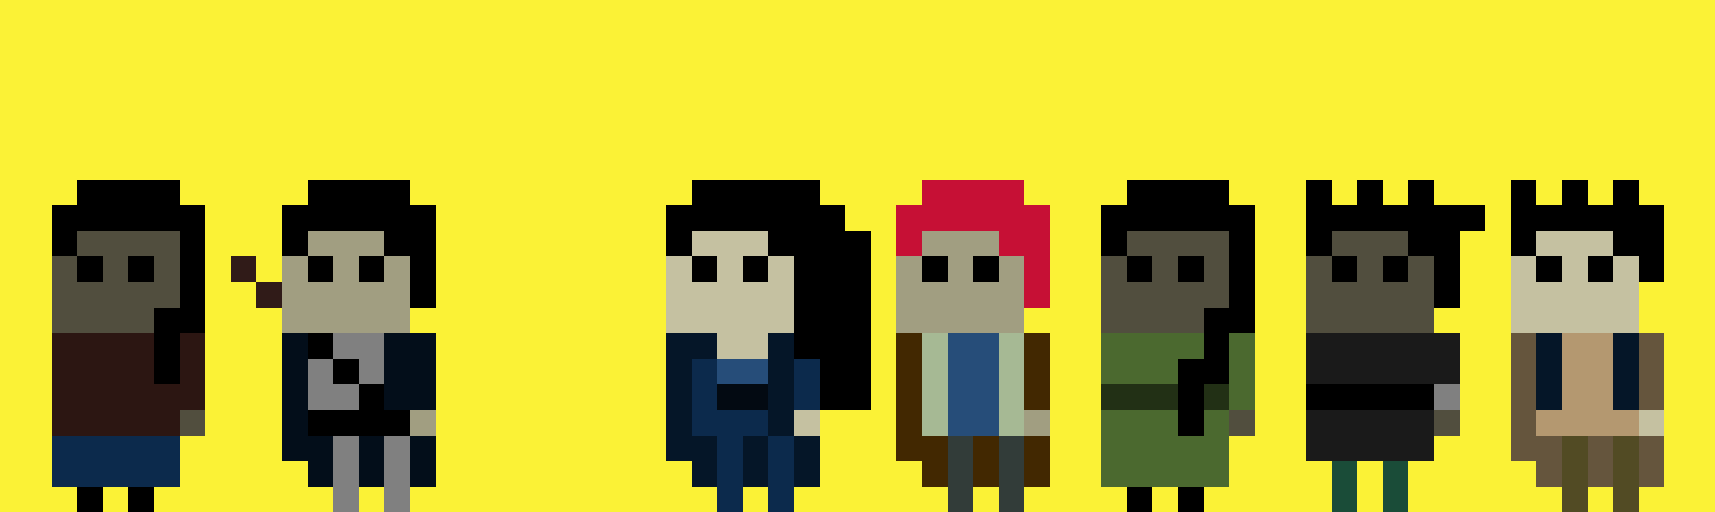 First 2D 16x16 Characters